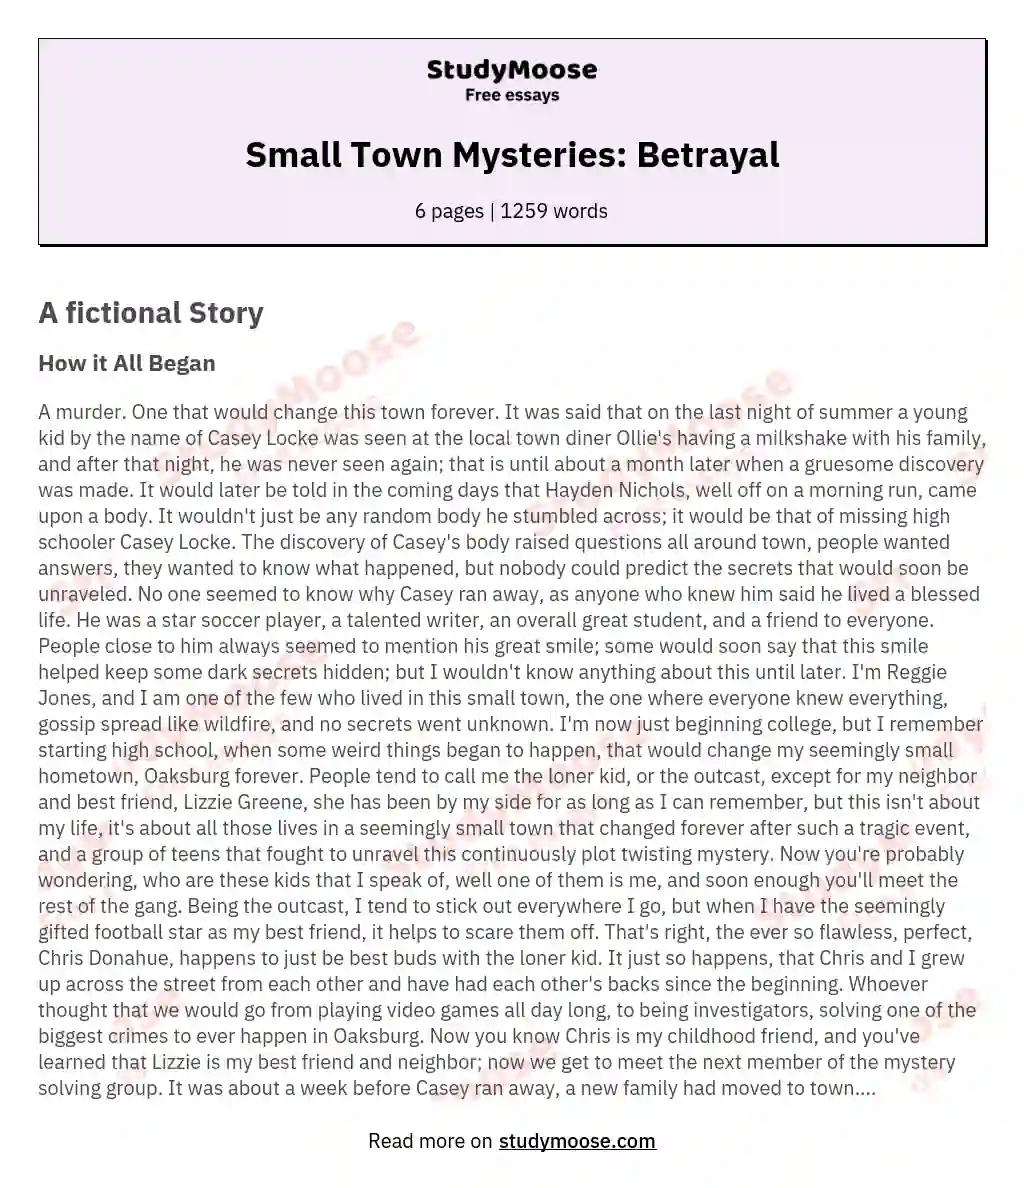 Small Town Mysteries: Betrayal